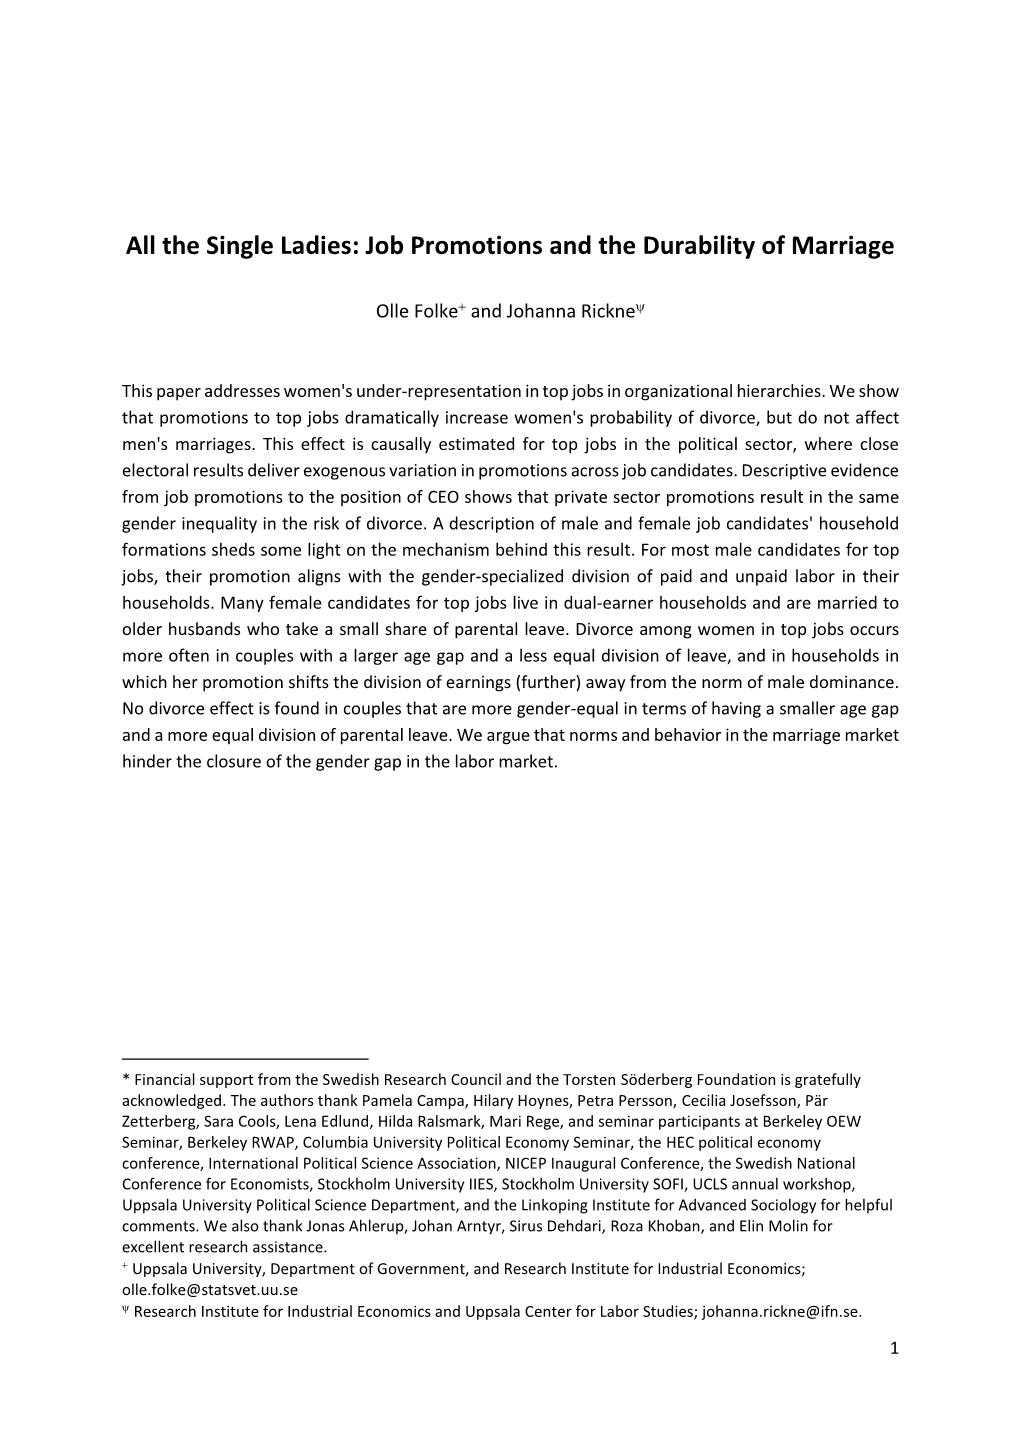 Job Promotions and the Durability of Marriage